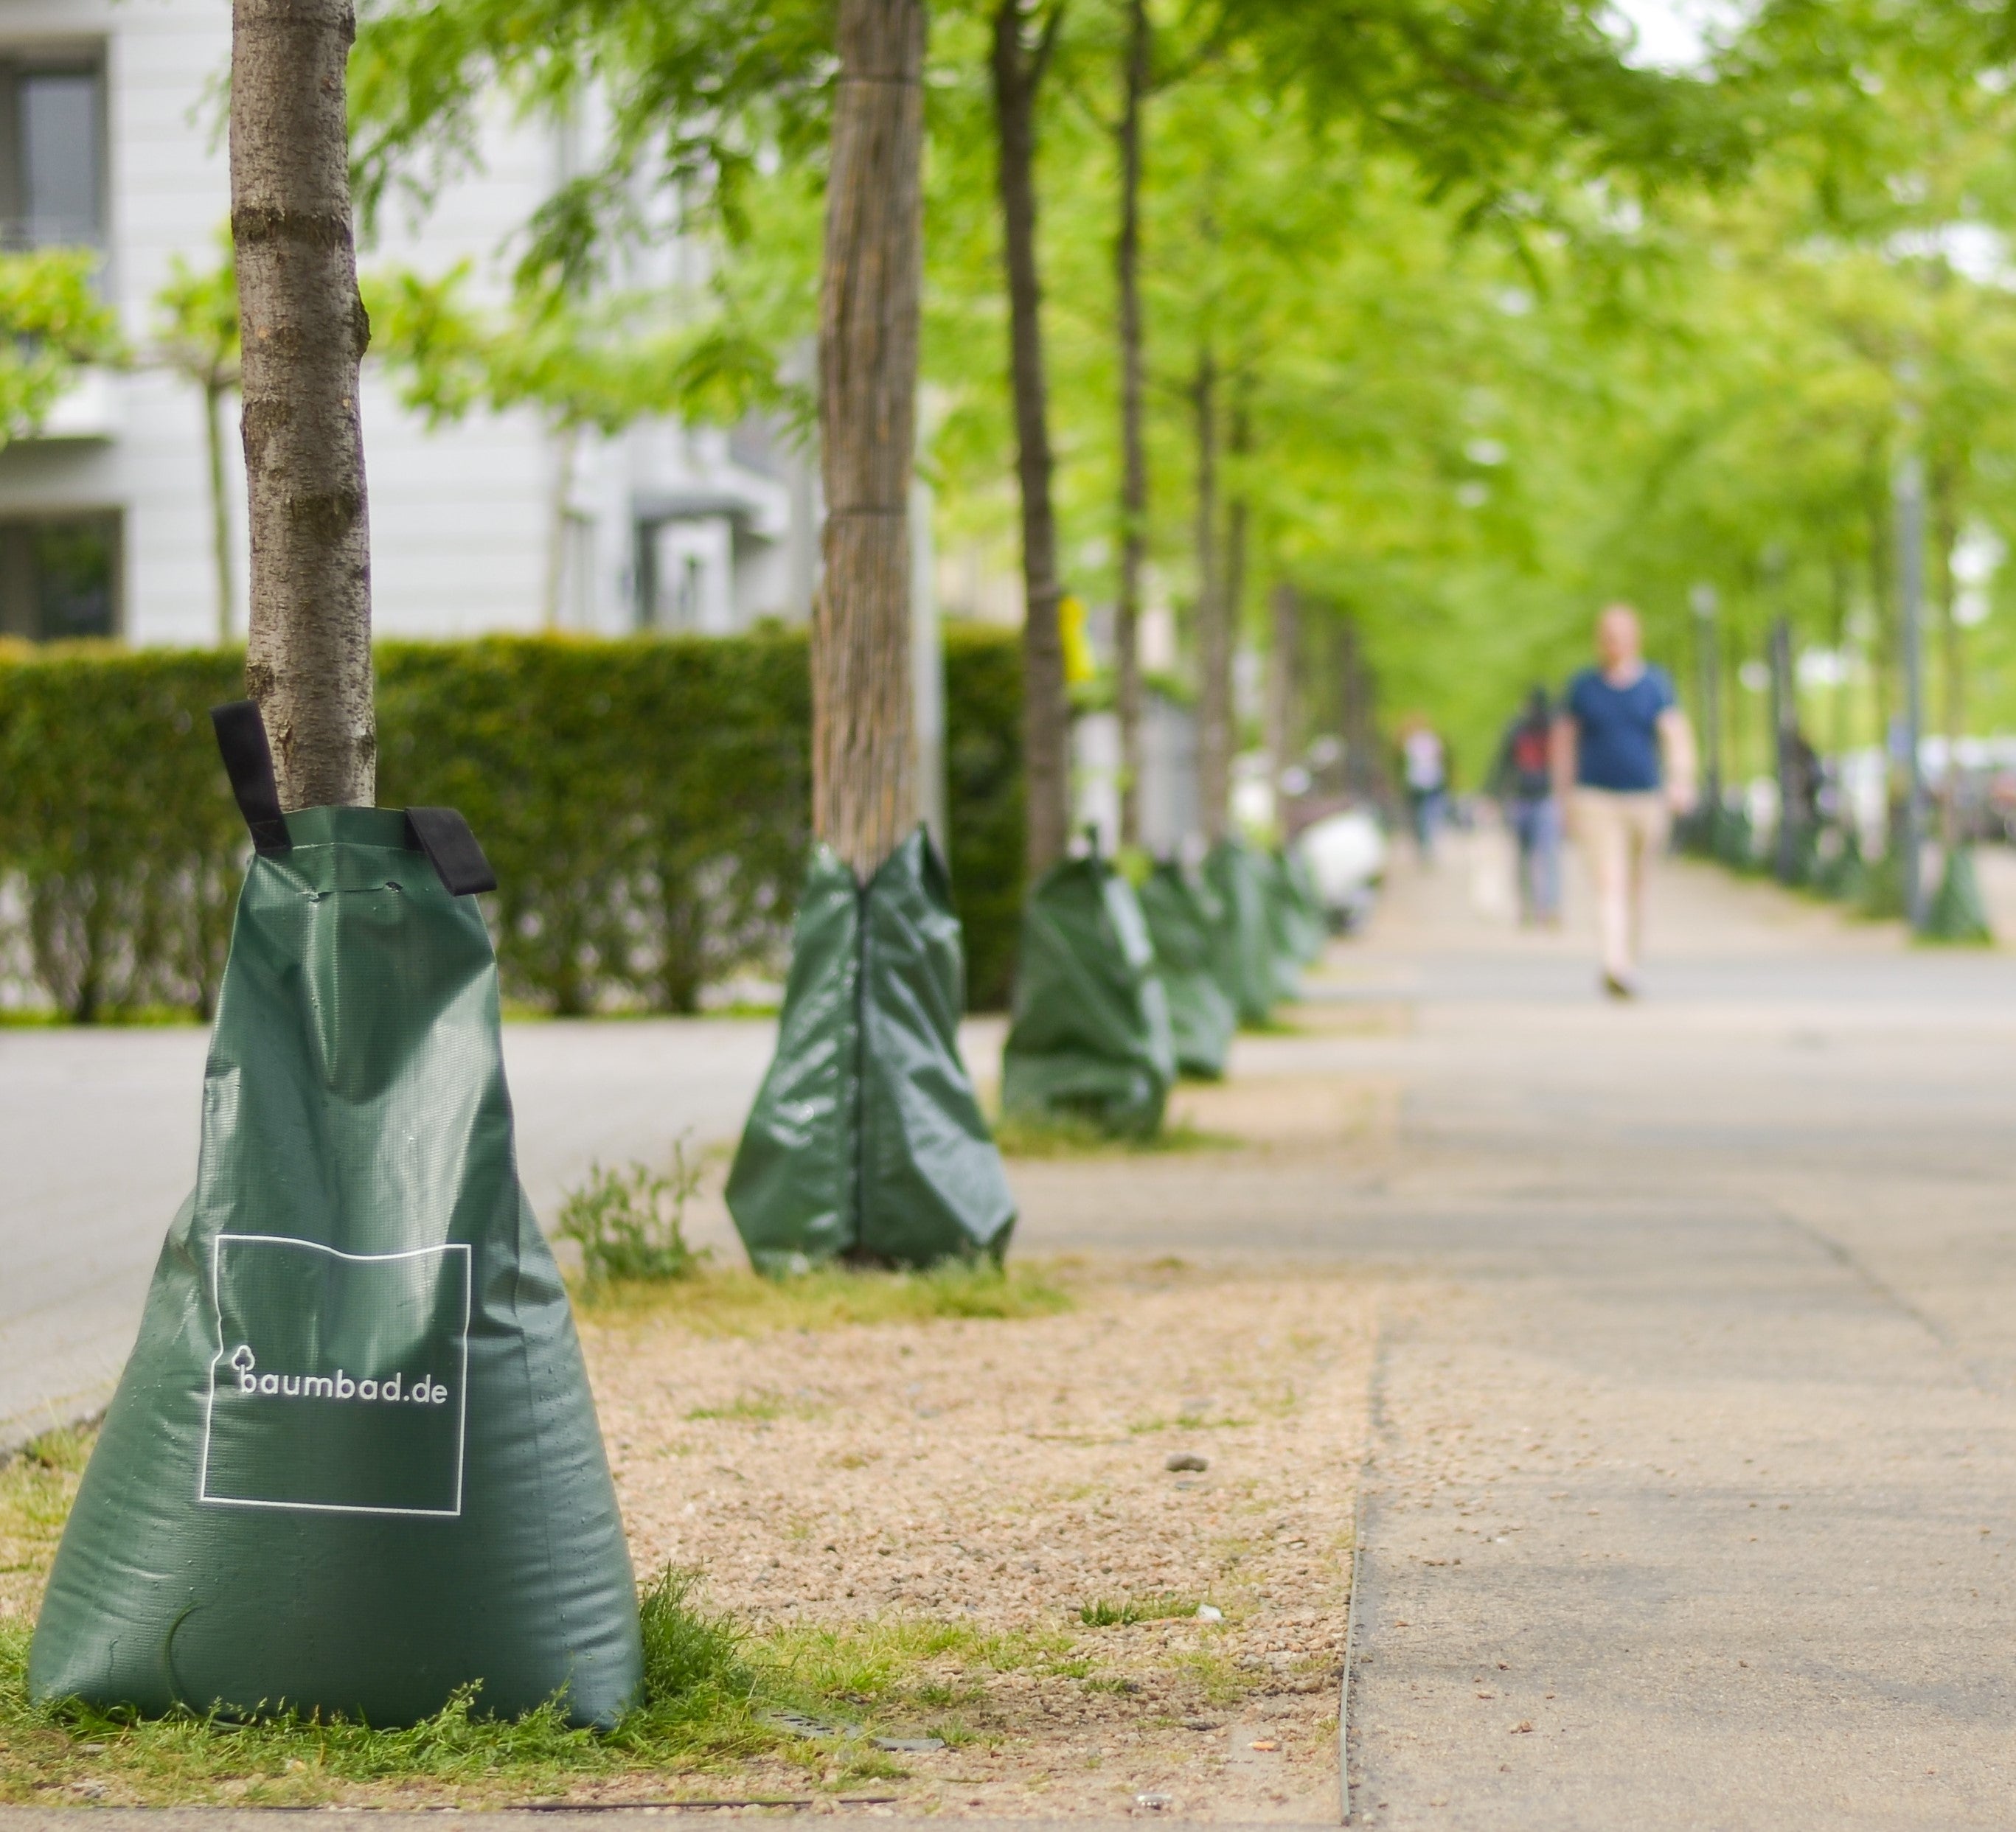 Irrigation bags for cities